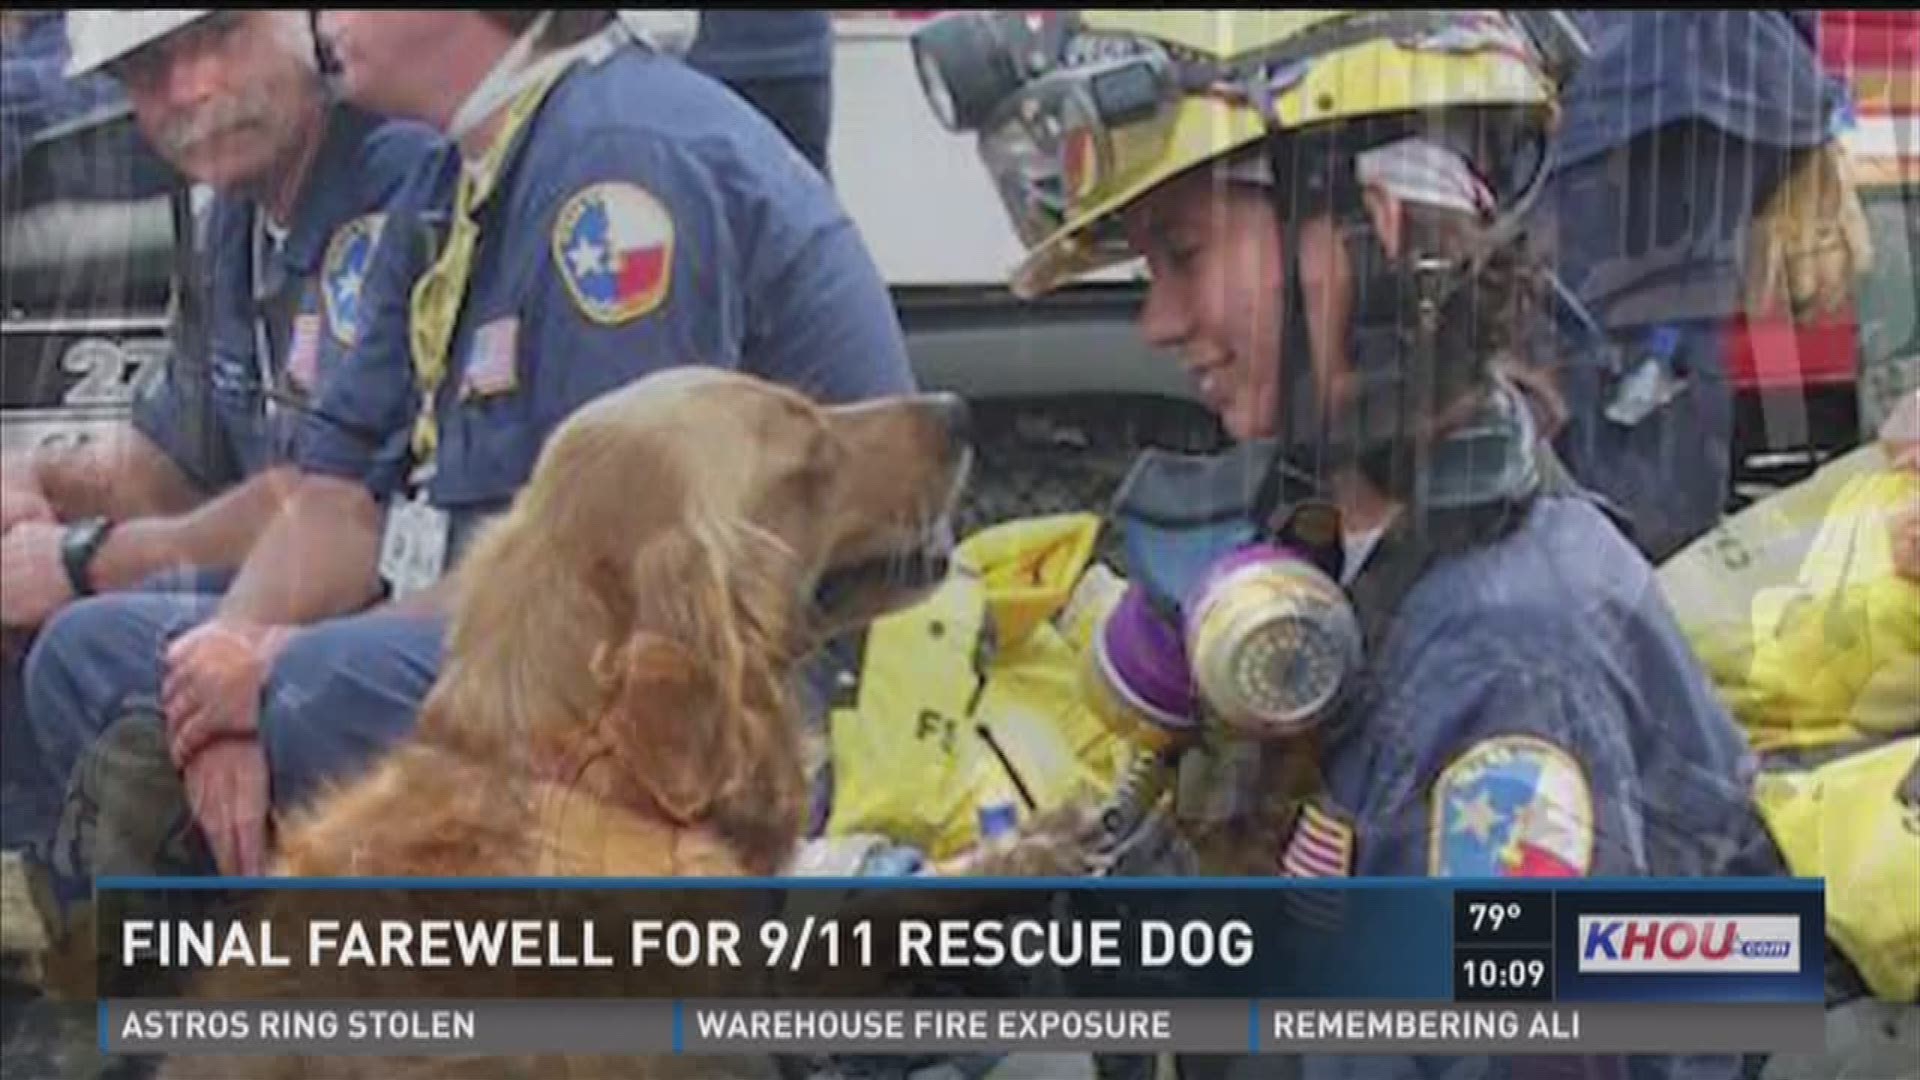 Bretagne, the last surviving search-and-rescue dog from 9/11, was put to sleep Monday in Cypress at 16 years old.